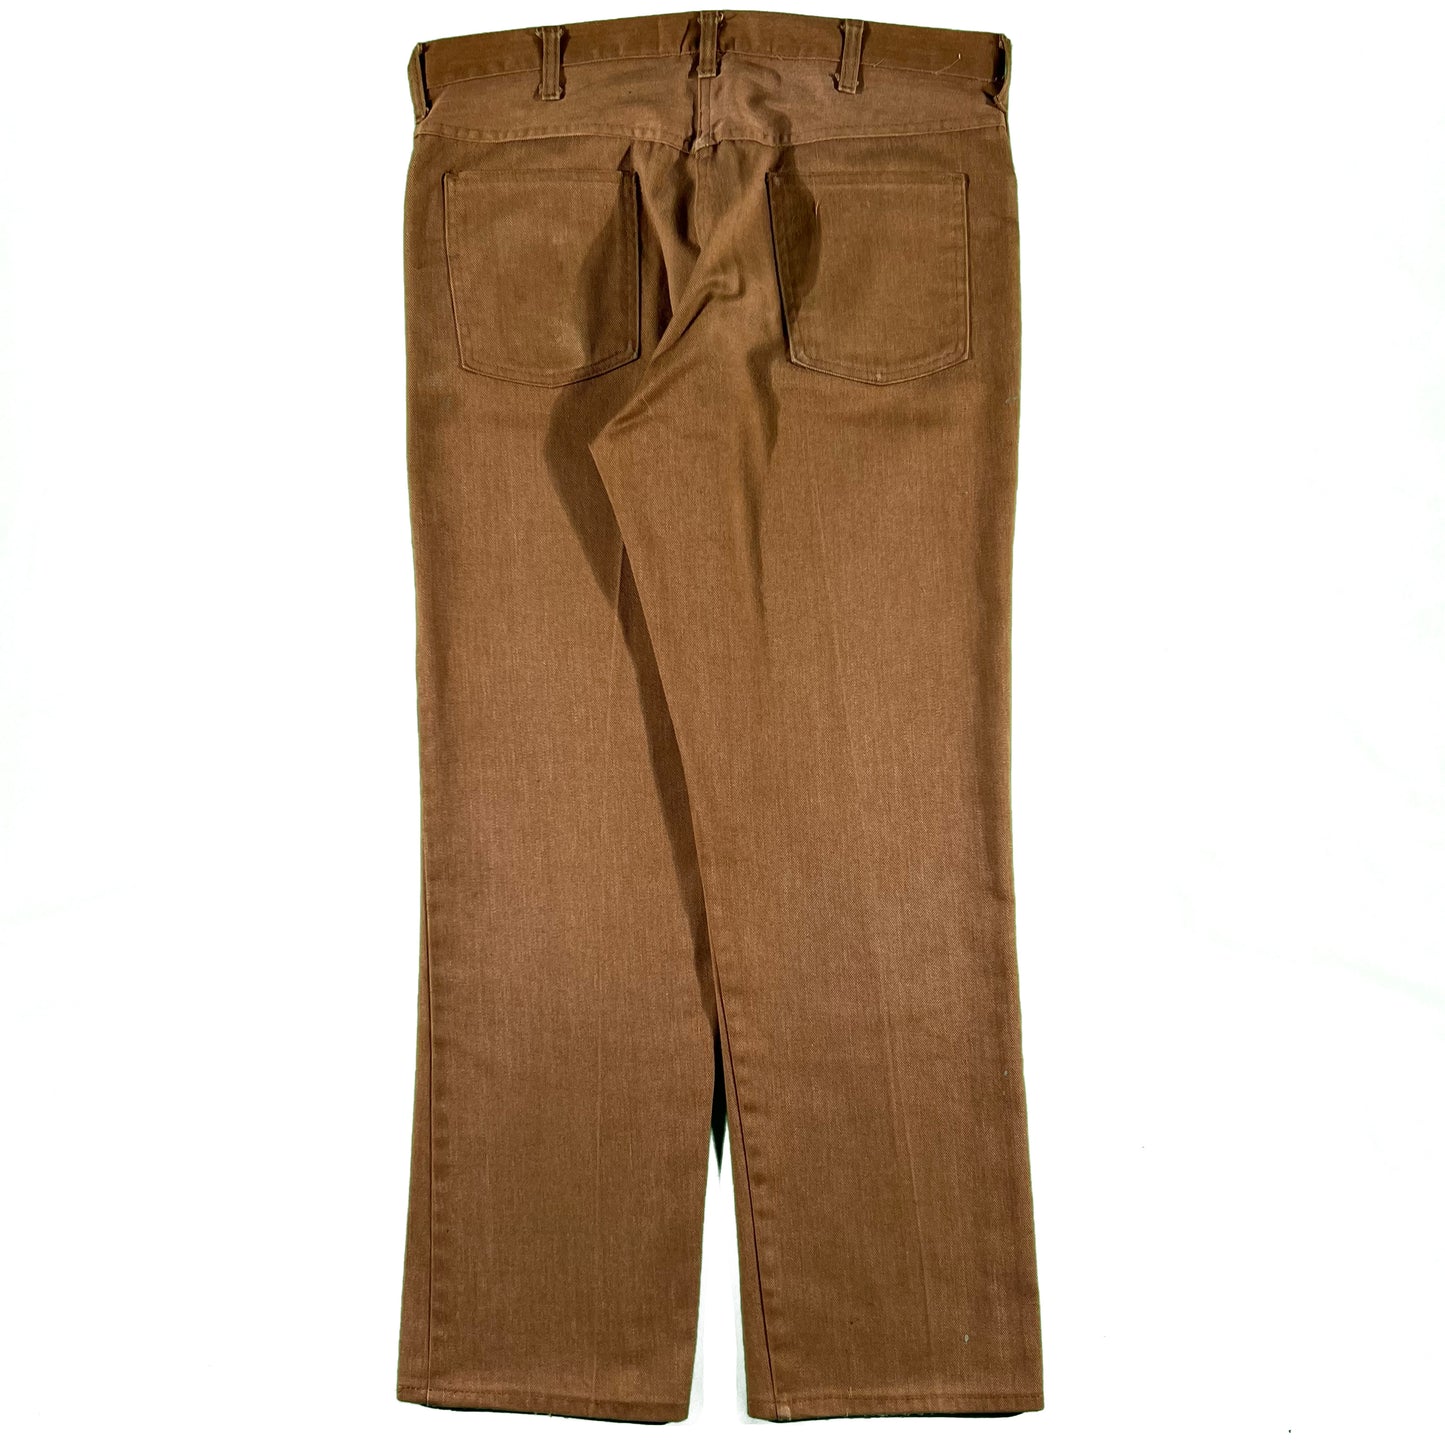 70s Faded Caramel Tan JcPenney Work Pants- 35x29.5